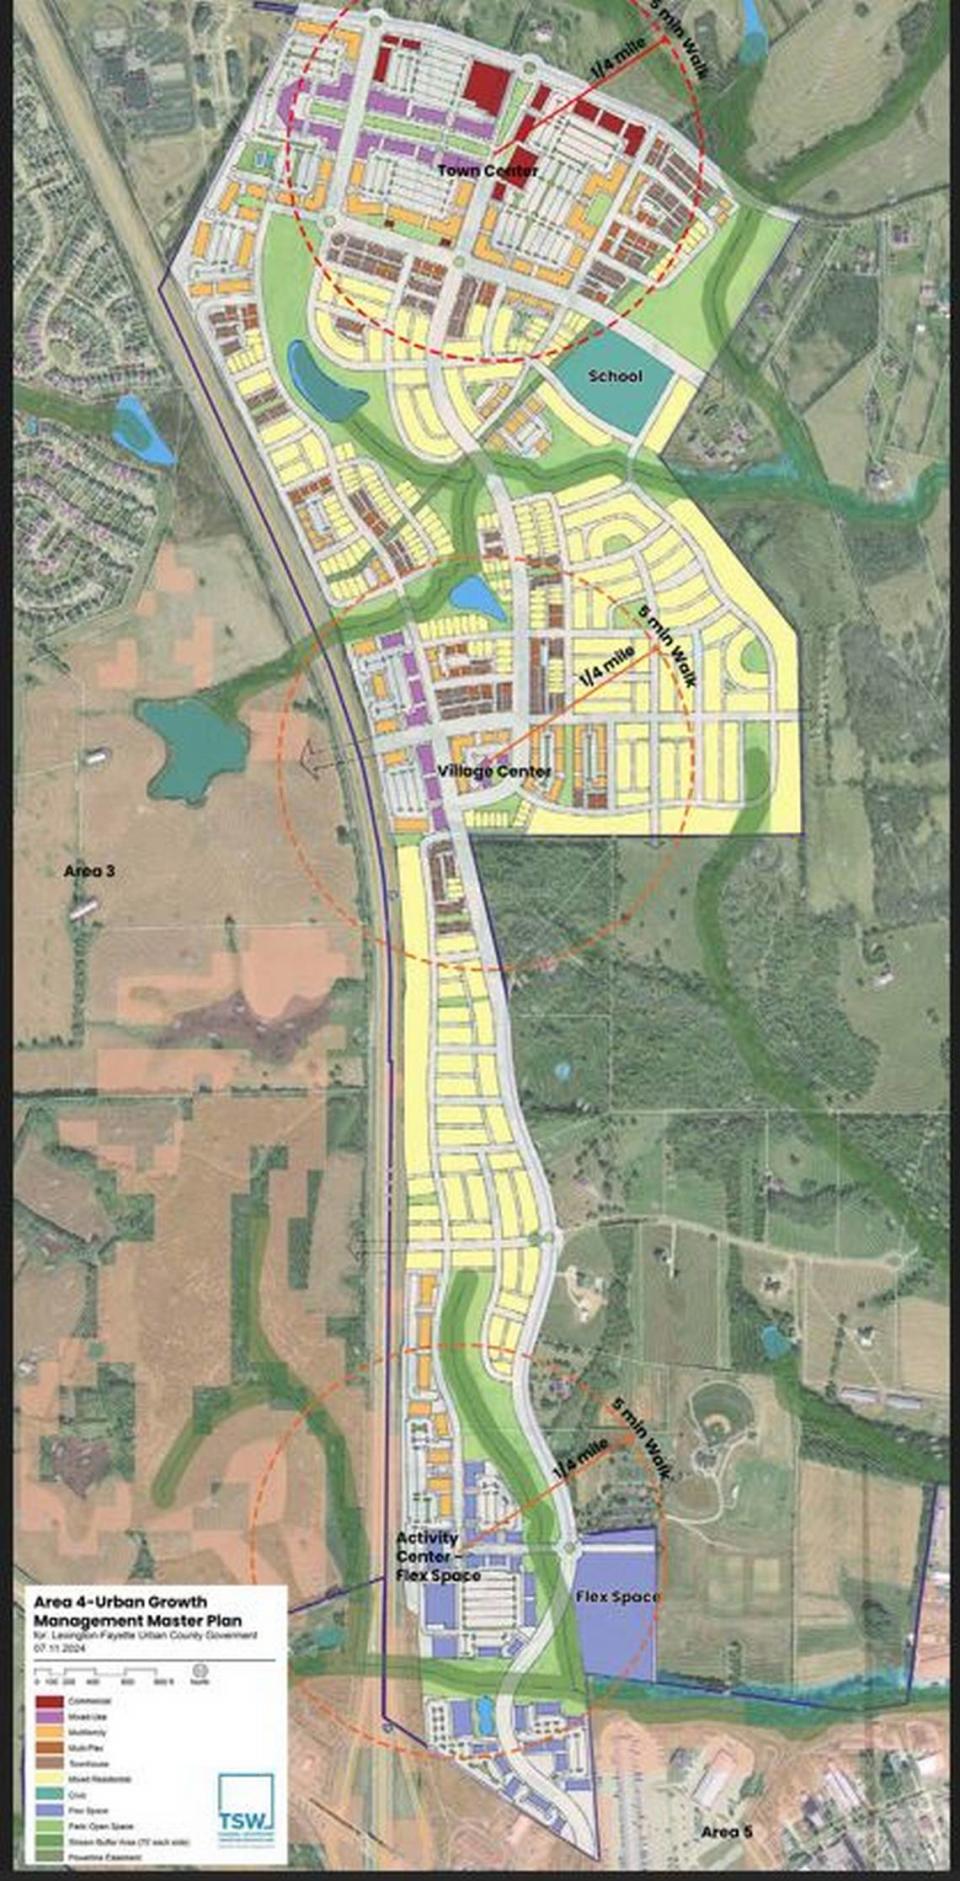 One of the proposed expansion areas includes a section bordered by Interstate 75, Todds Road and Canebrake Drive.